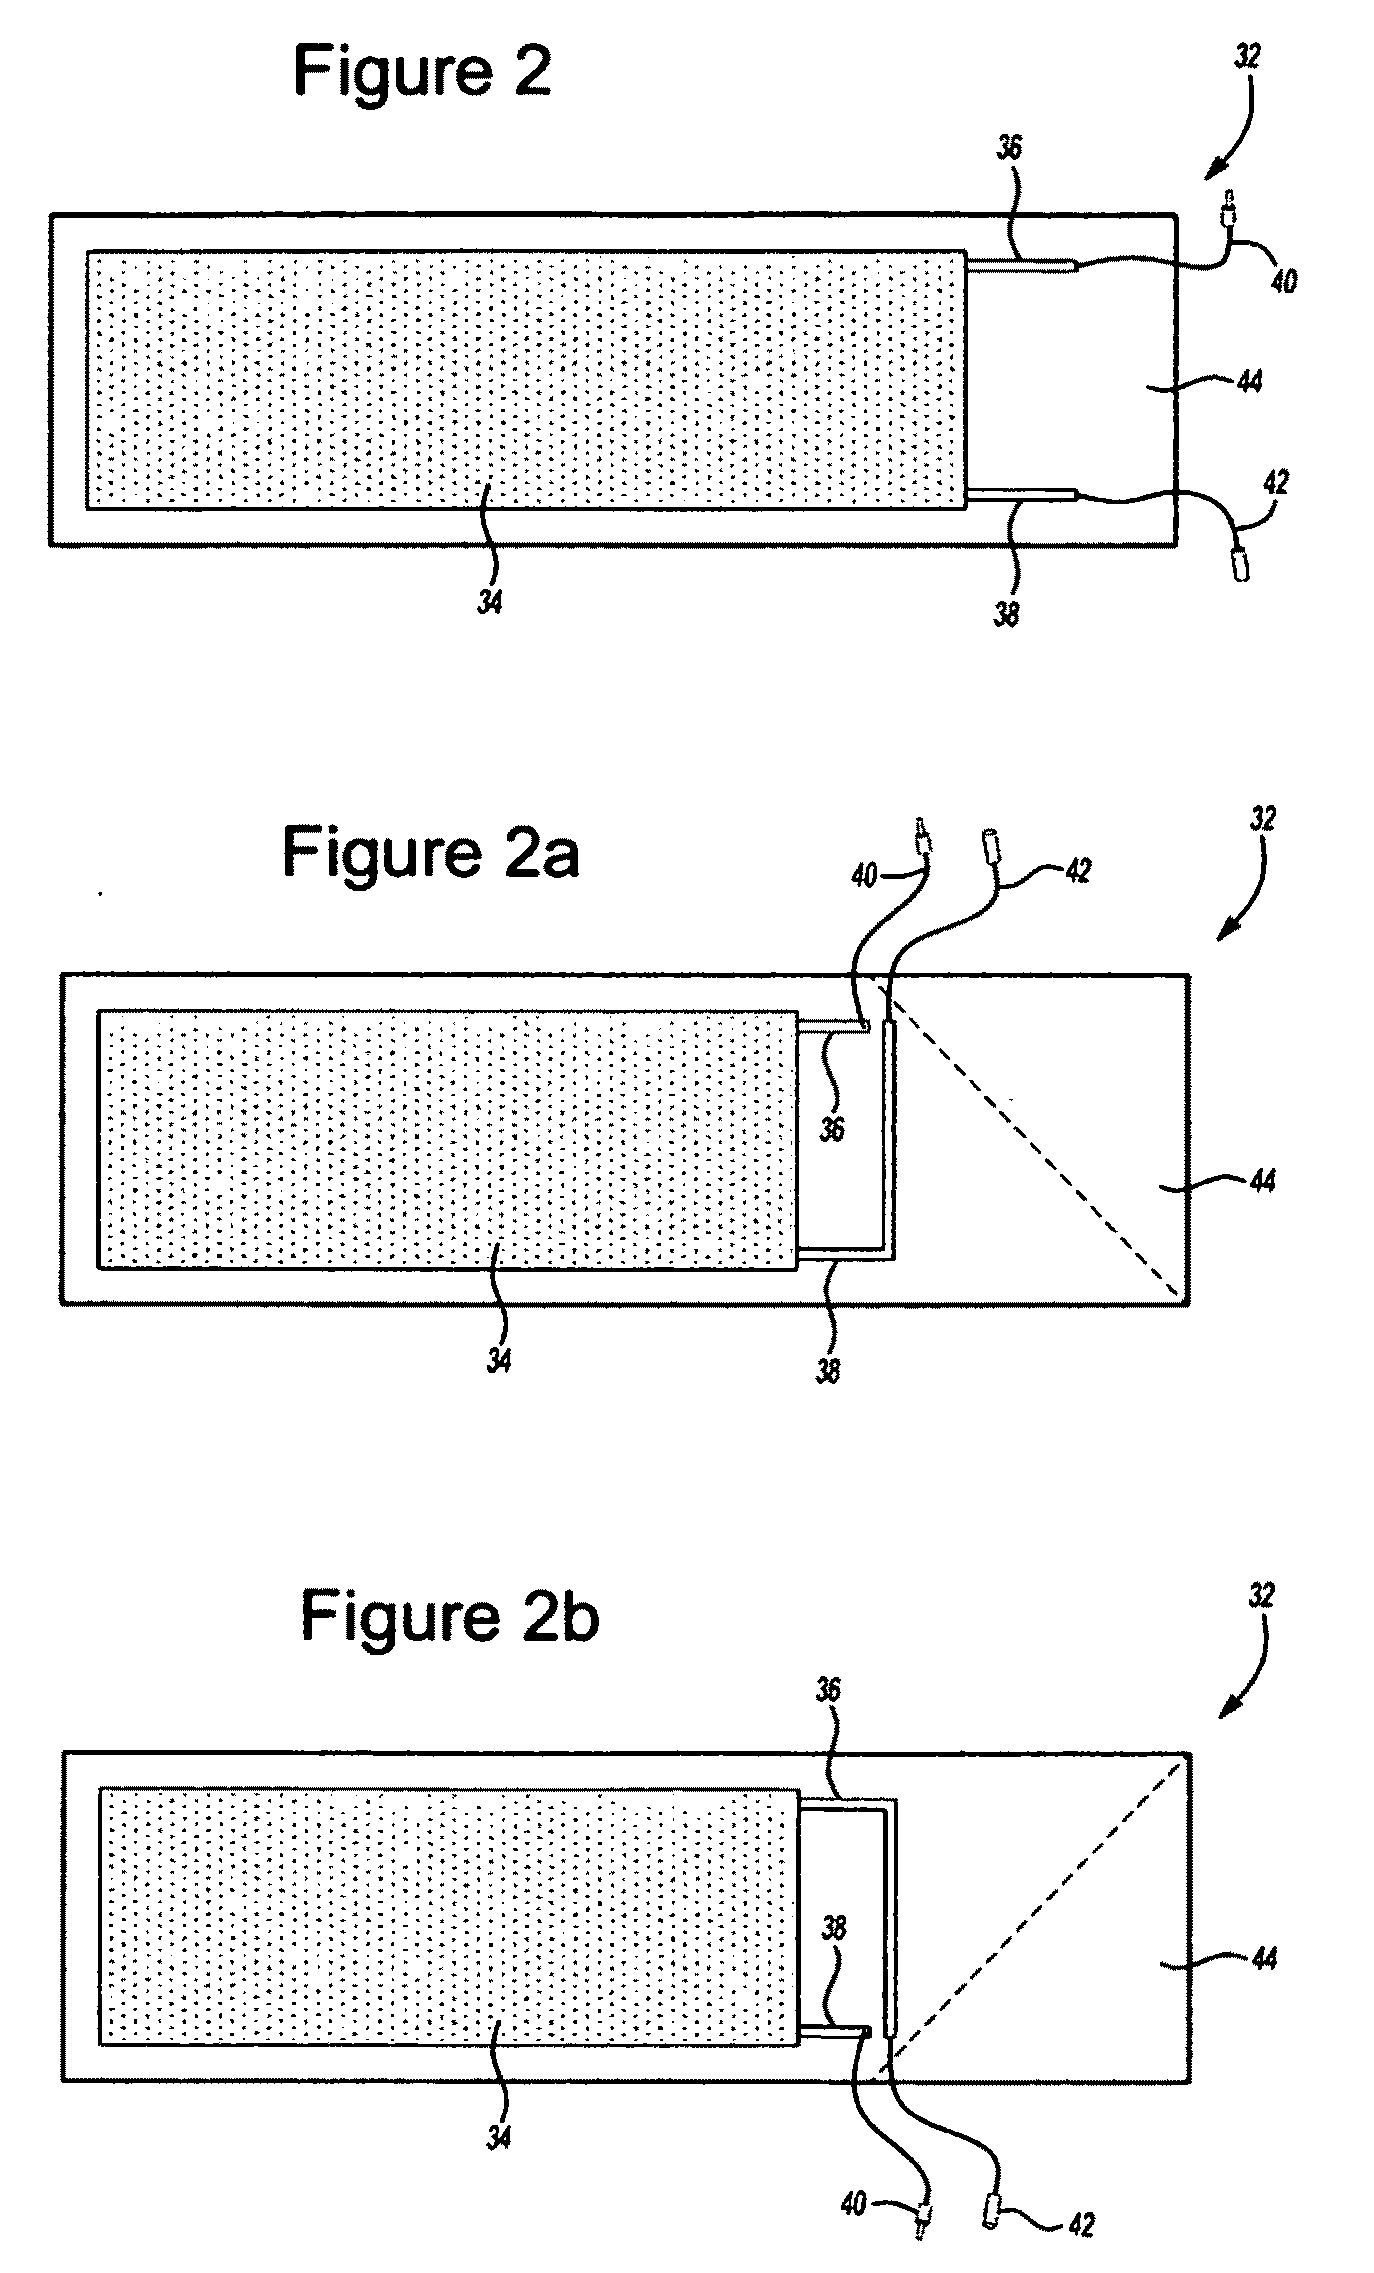 Method and system for providing and installing photovoltaic material